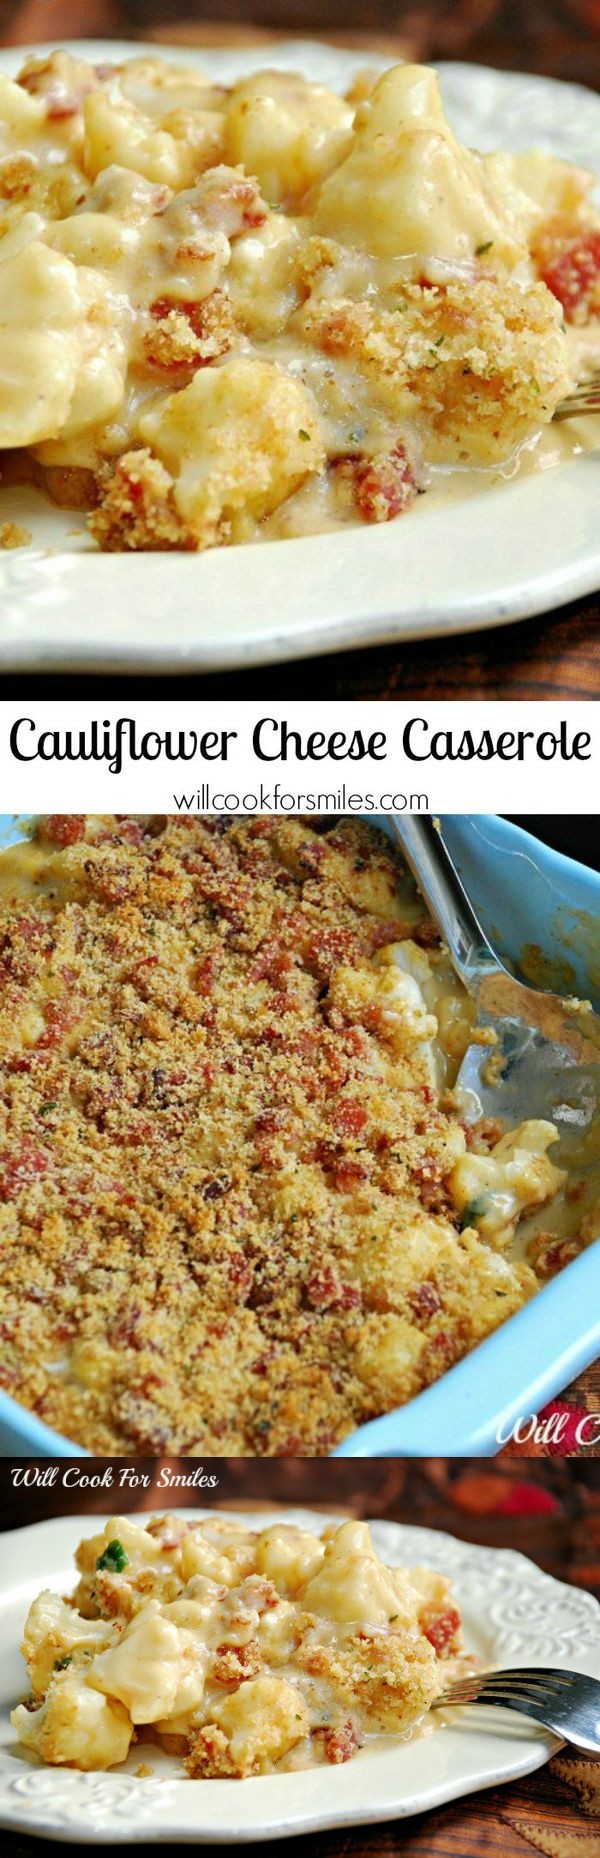 Cauliflower Cheese Casserole and Cheesy Biscuits (Two Recipes